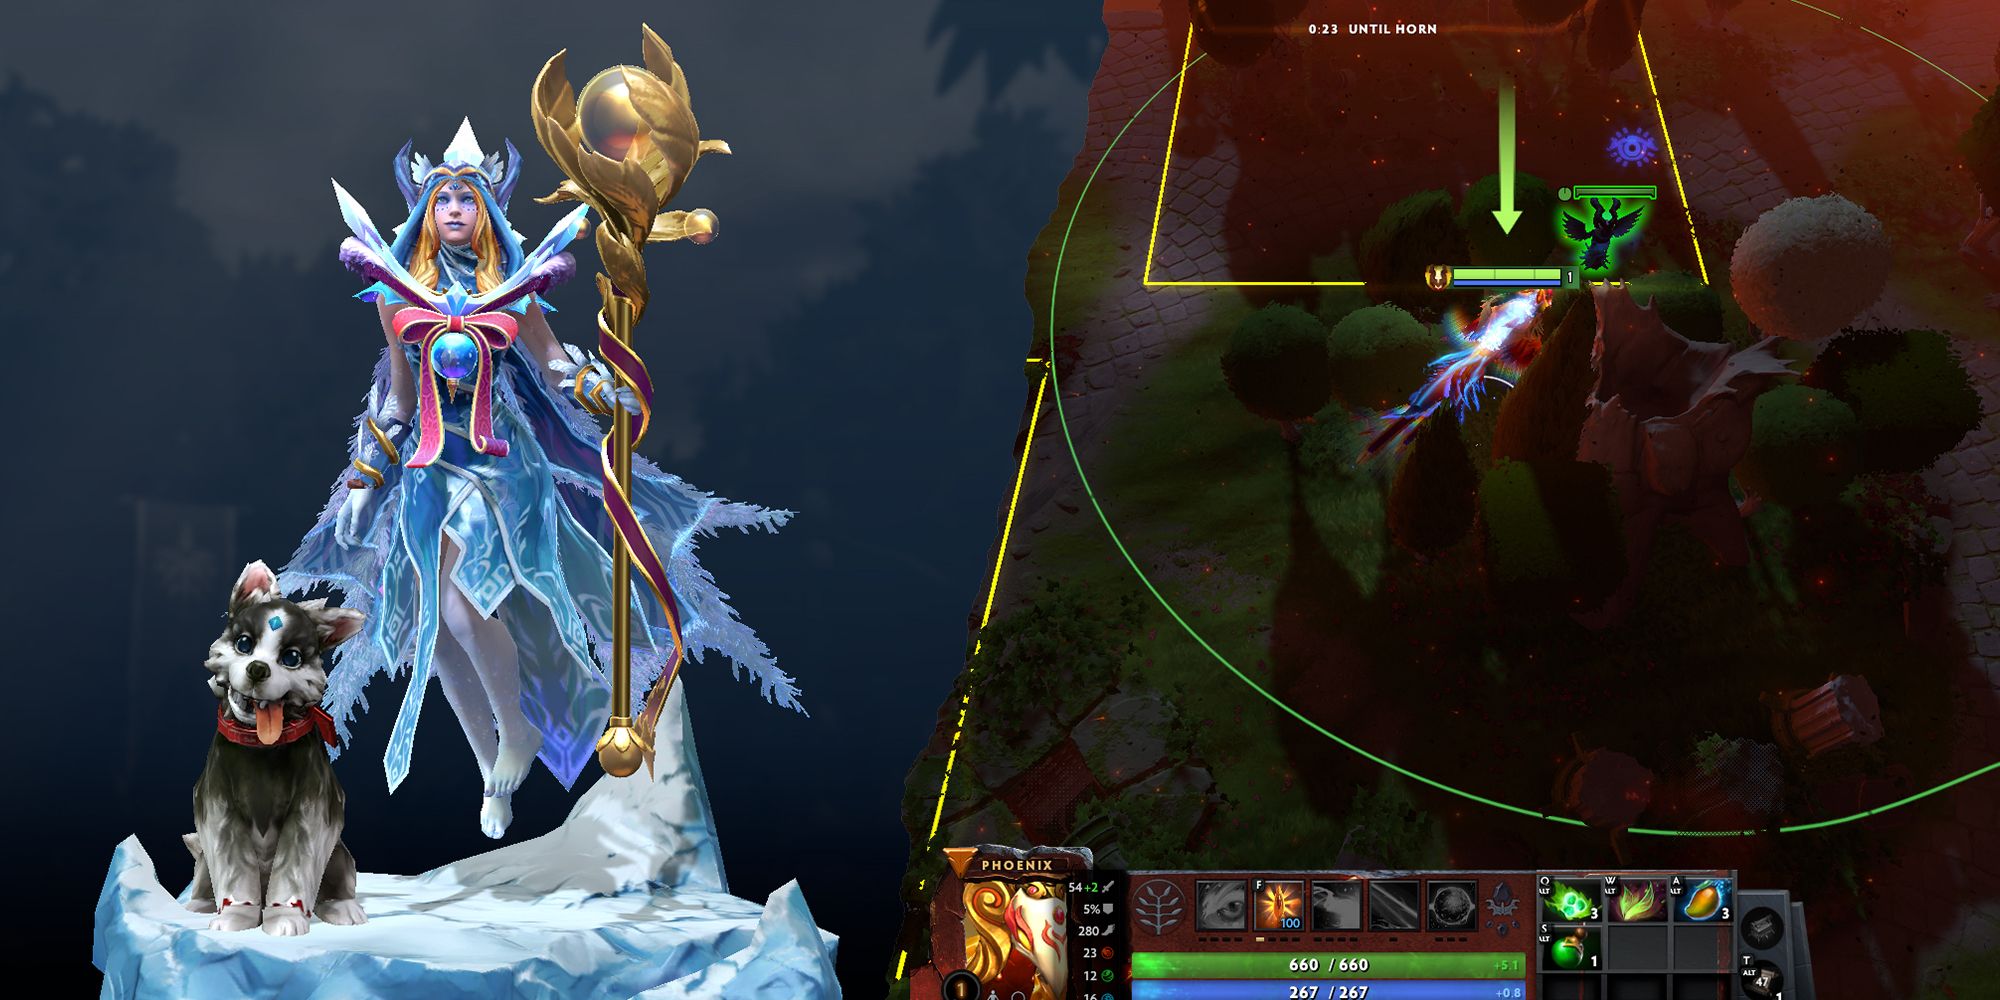 Dota 2: Image of Support Hero (Crystal Maiden) and Phoenix blocking the enemy neutral camp before the game starts